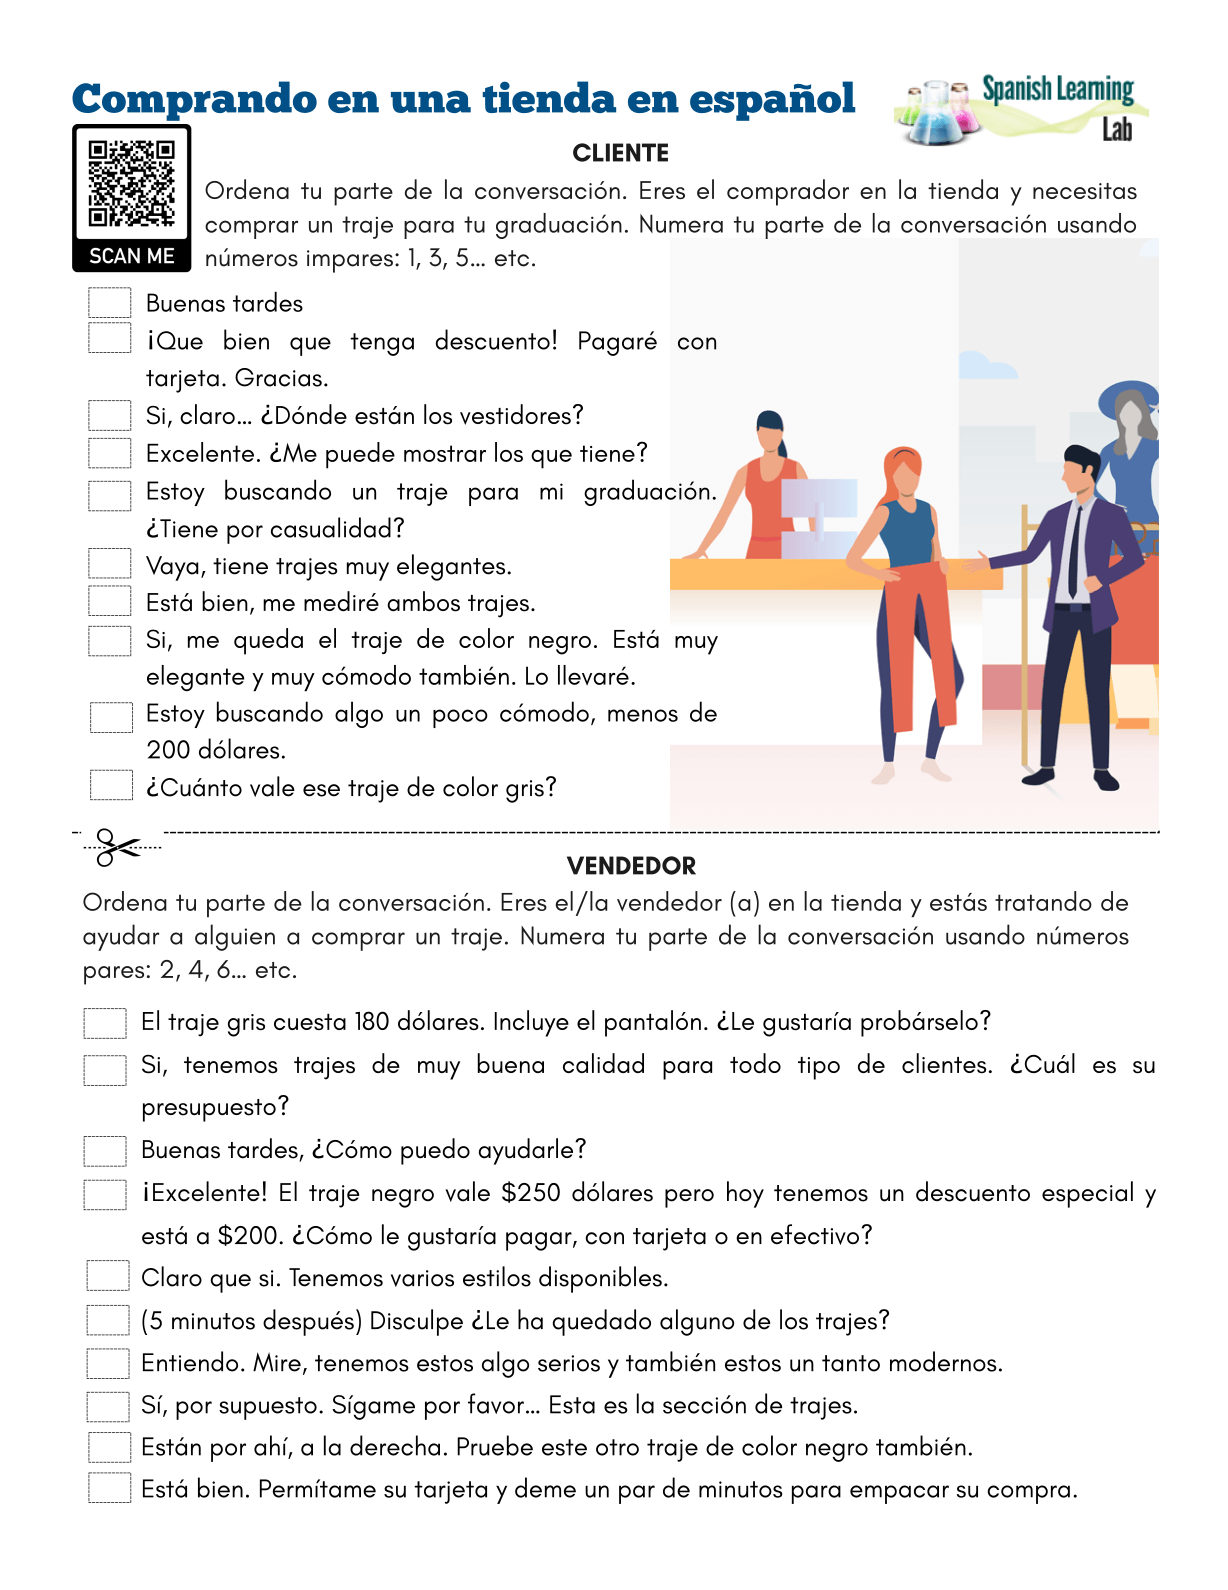 Shopping in Spanish at a Store - PDF Worksheet - Spanish Learning Lab